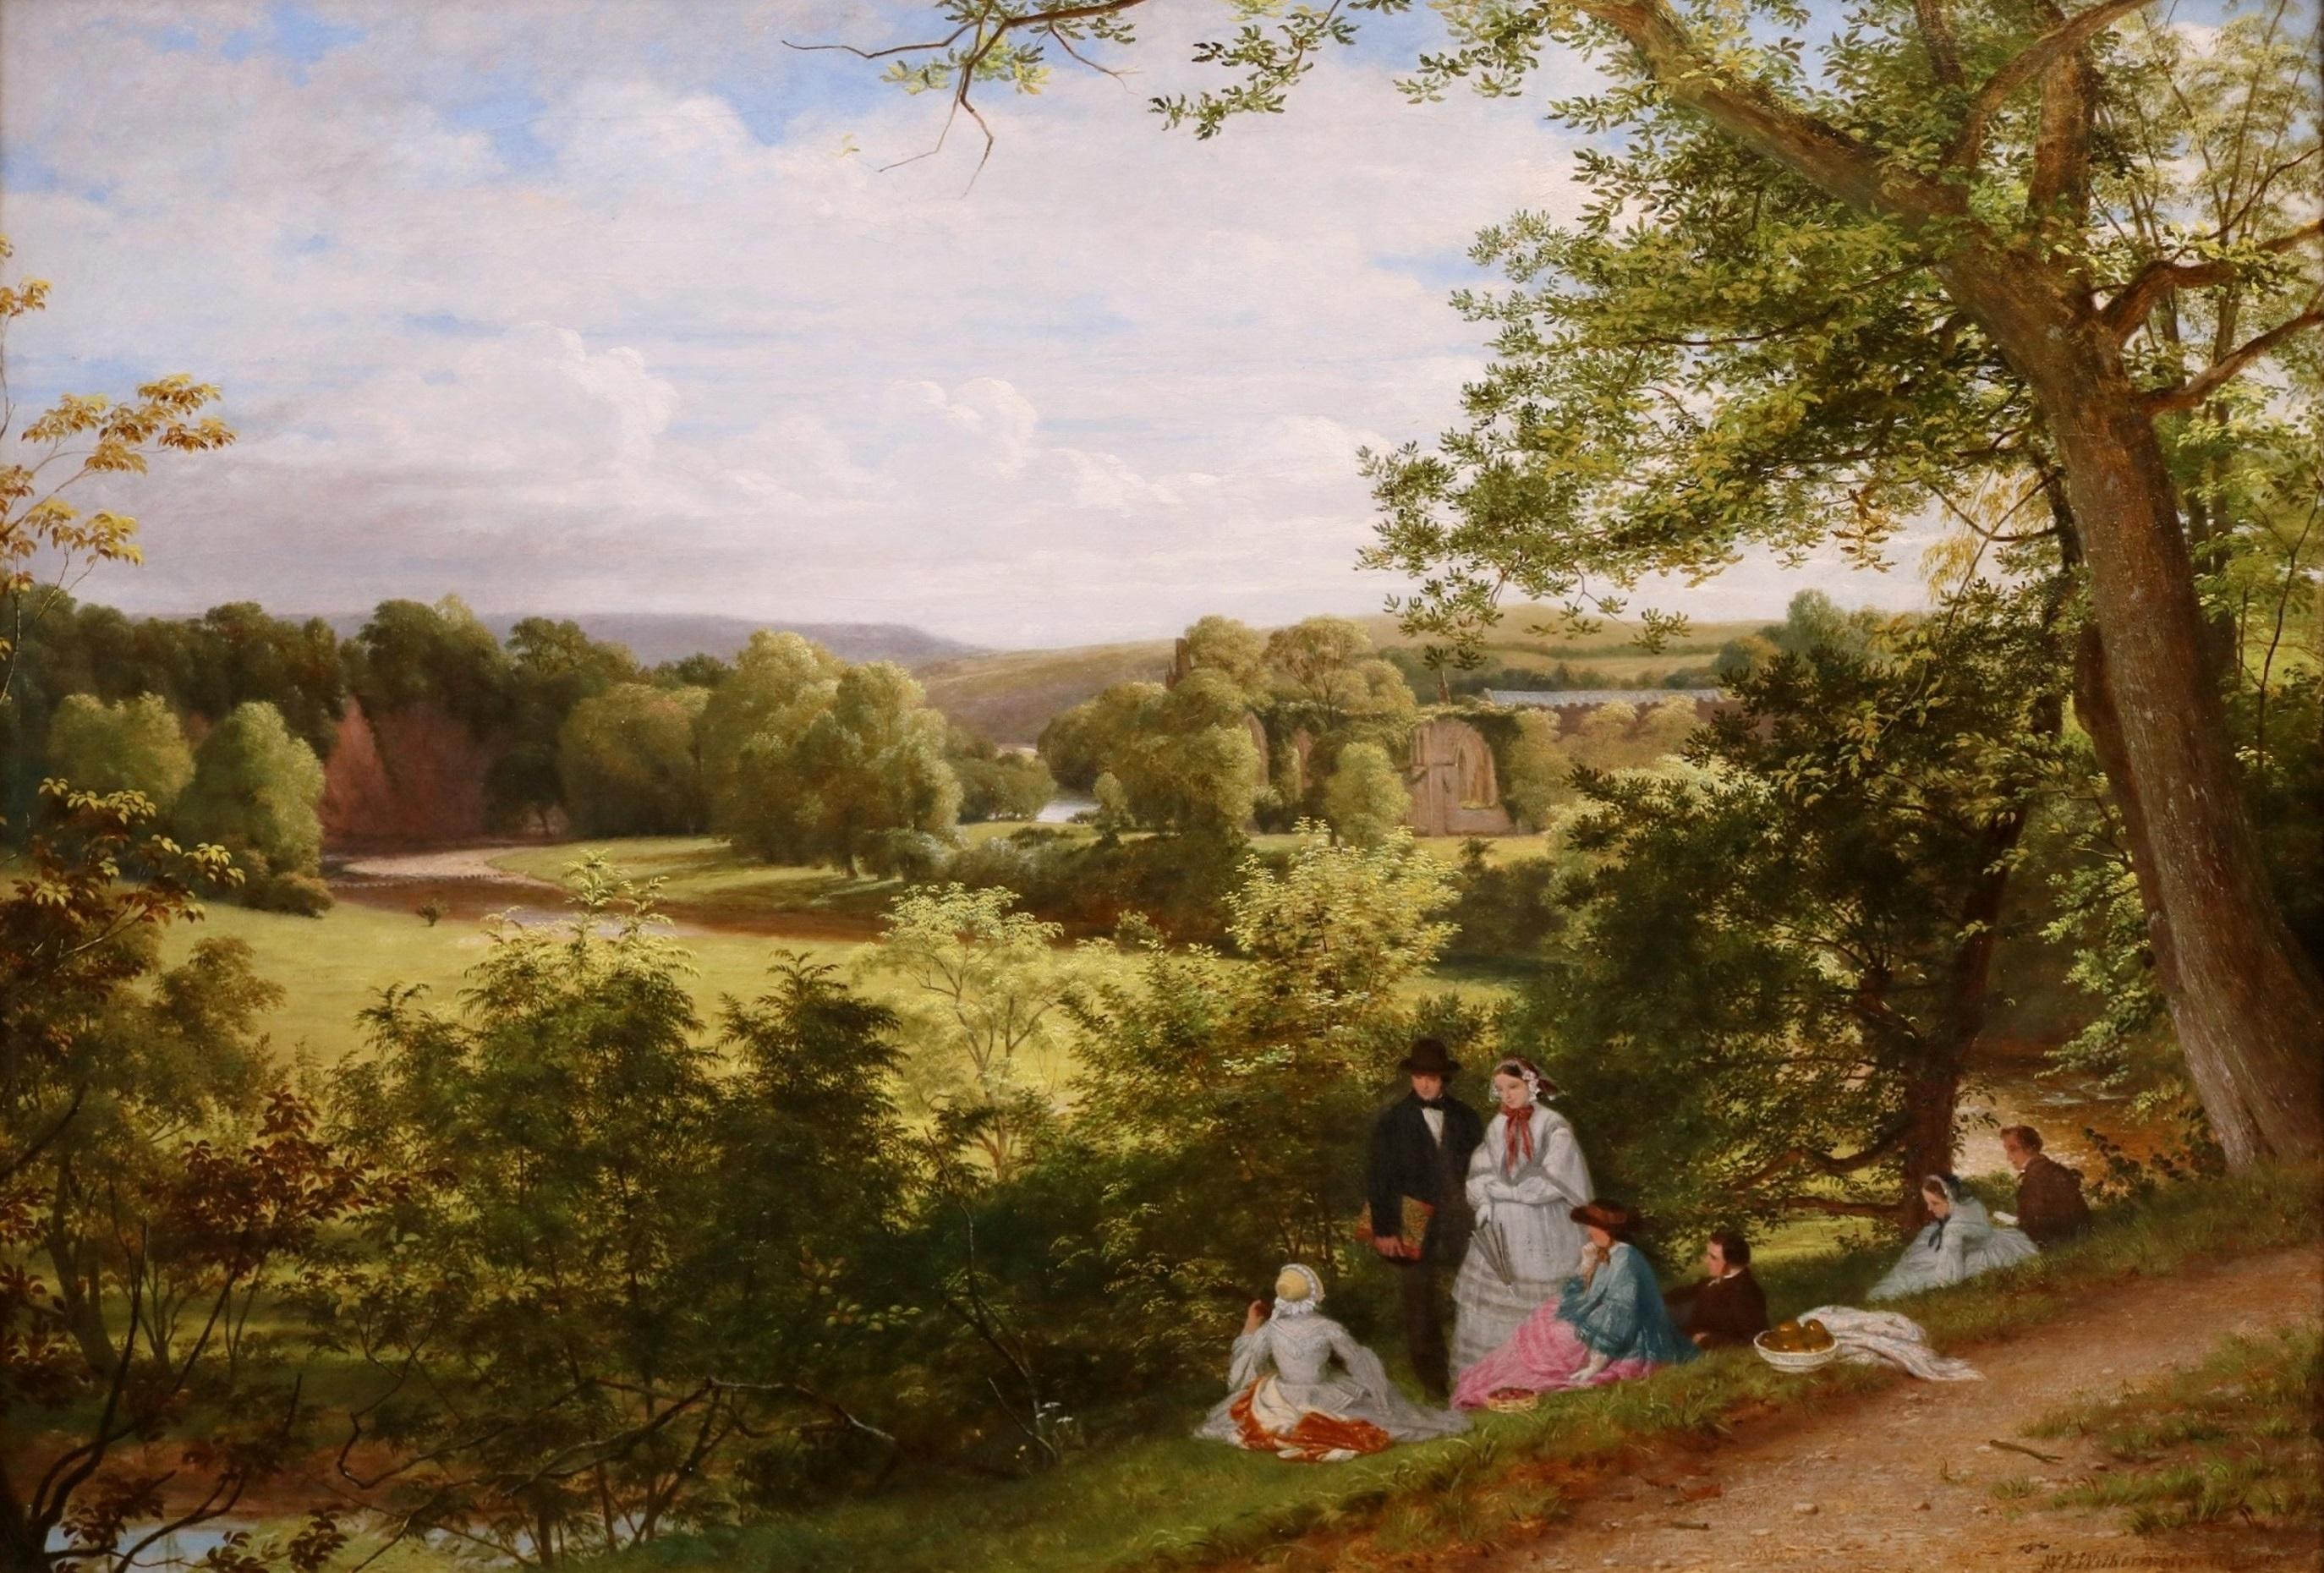 ‘A Day in the Country’ by William Frederick Witherington R.A. (1785-1865).

The painting – which depicts a group of Victorian figures on a summer’s day before an extensive landscape of Wharfedale and the ruins of Bolton Priory – is signed by the